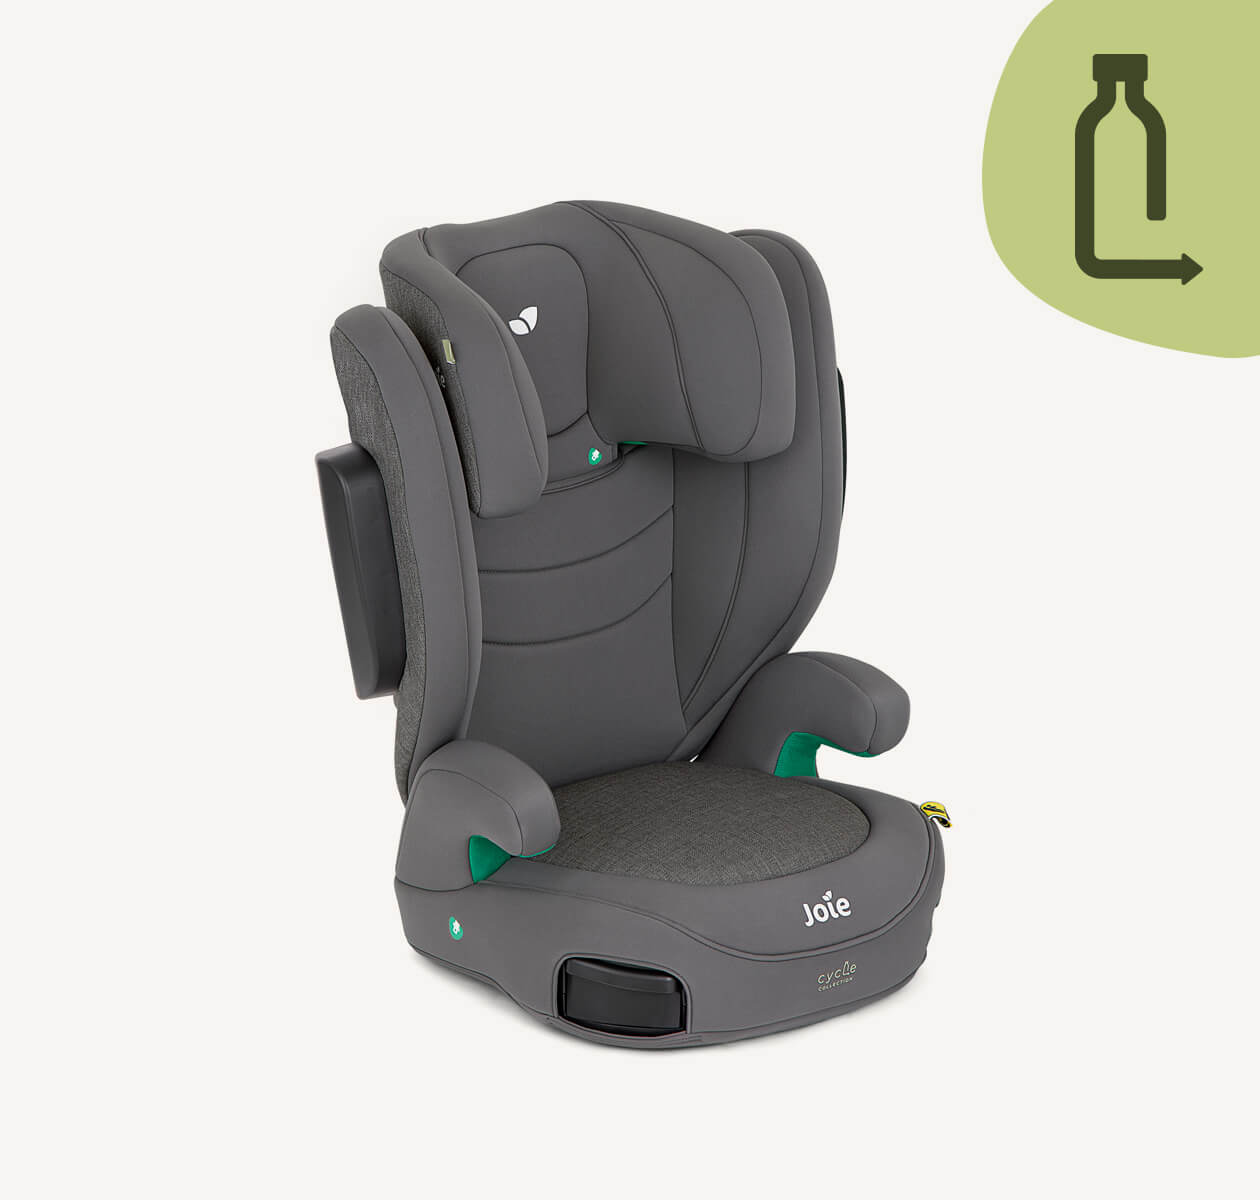  Gray I-Trillo high back booster seat facing to the right at a 45 degree angle with the headrest in the lowest position.